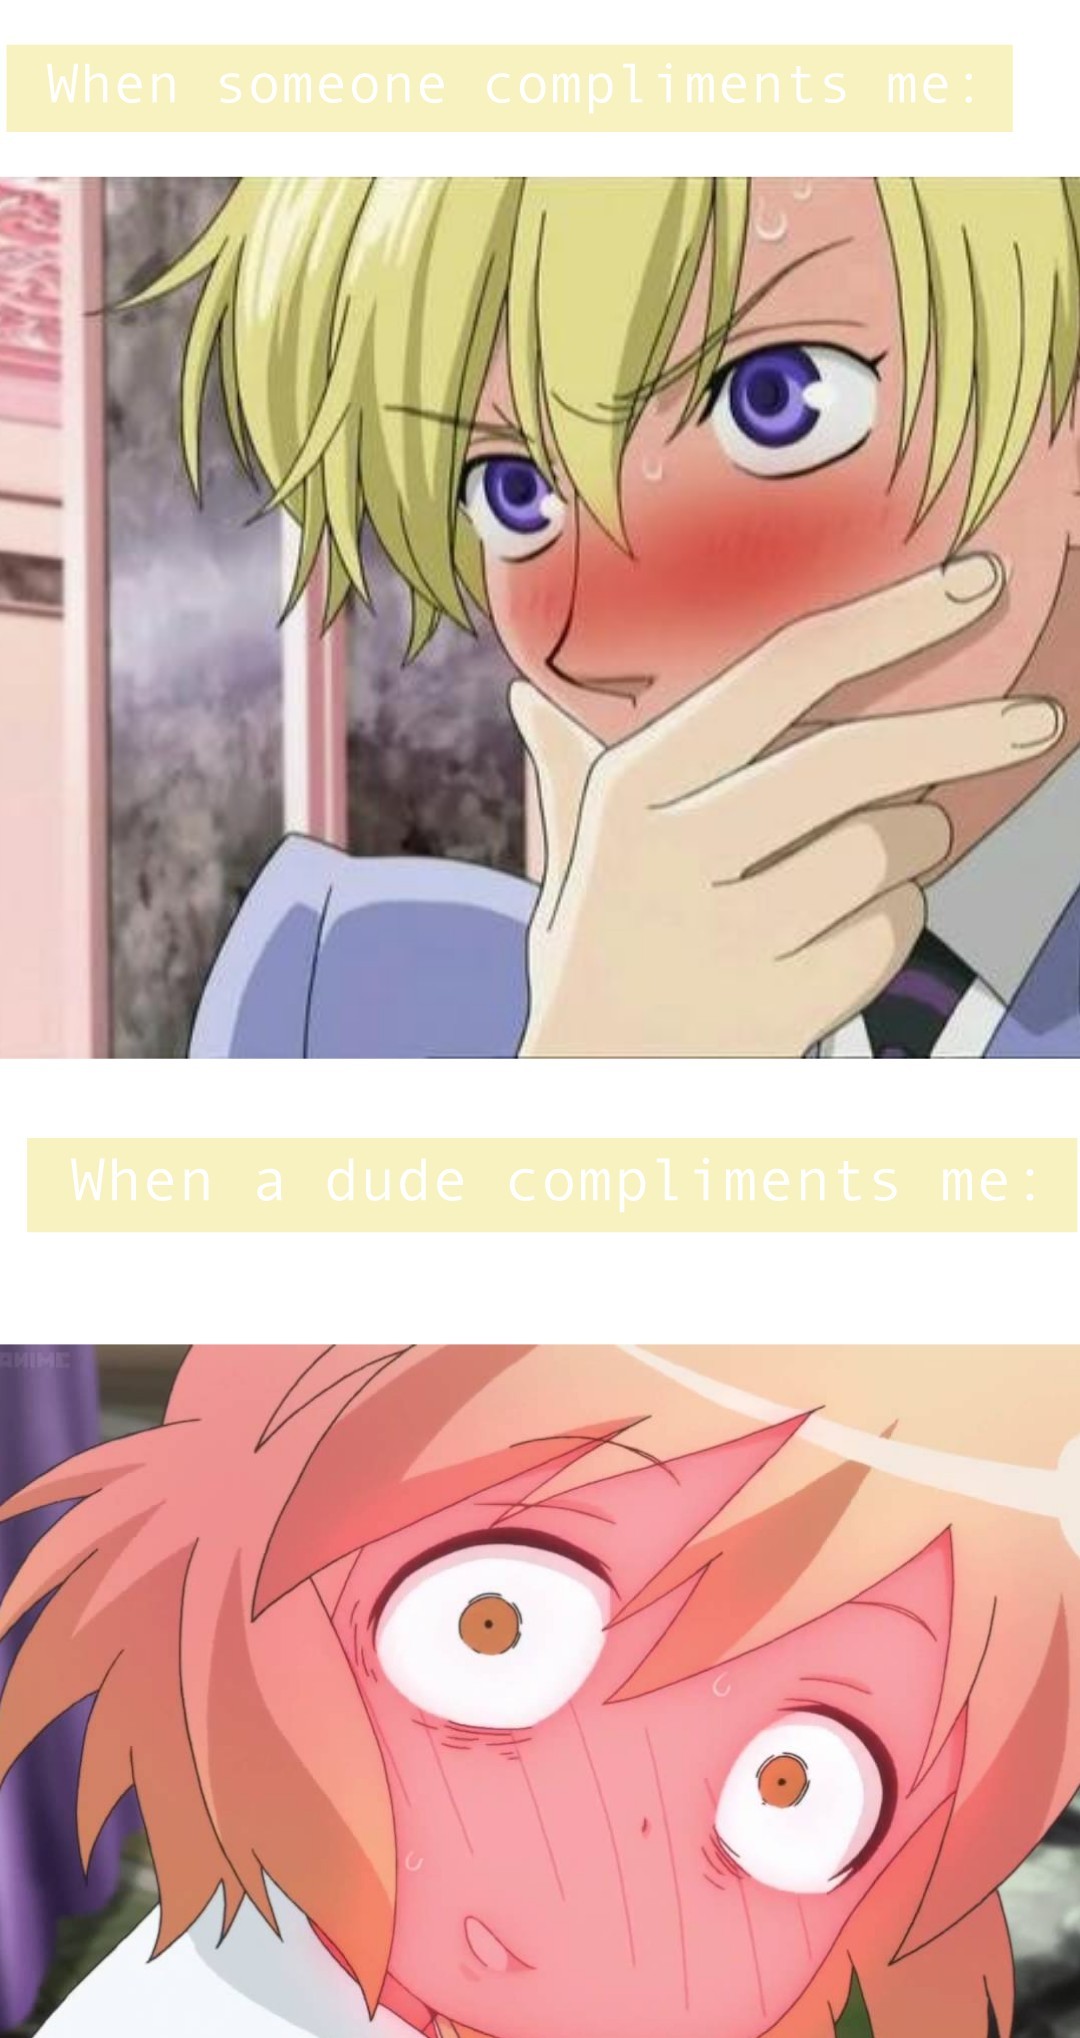 yup I'm ultra straight
have a dumb meme I made based off recent experiences
by "compliments me" I mean calls me cute or pretty
yes I'm dumb